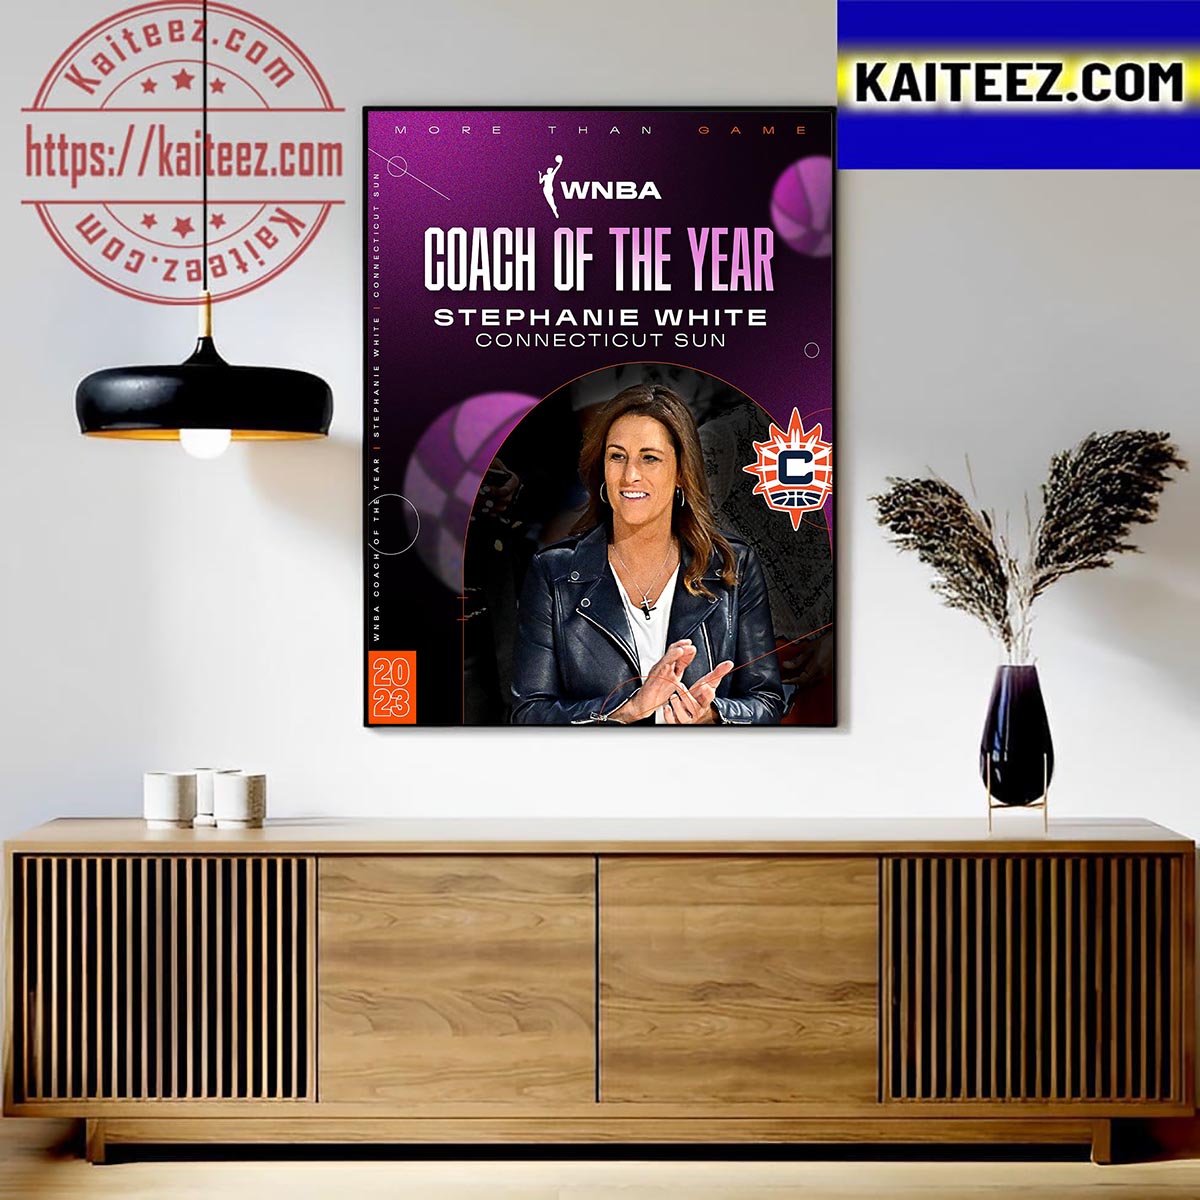 Congratulations To Stephanie White Of The Connecticut Sun For Being Named The 2023 WNBA Coach Of The Year Art Decor Poster Canvas